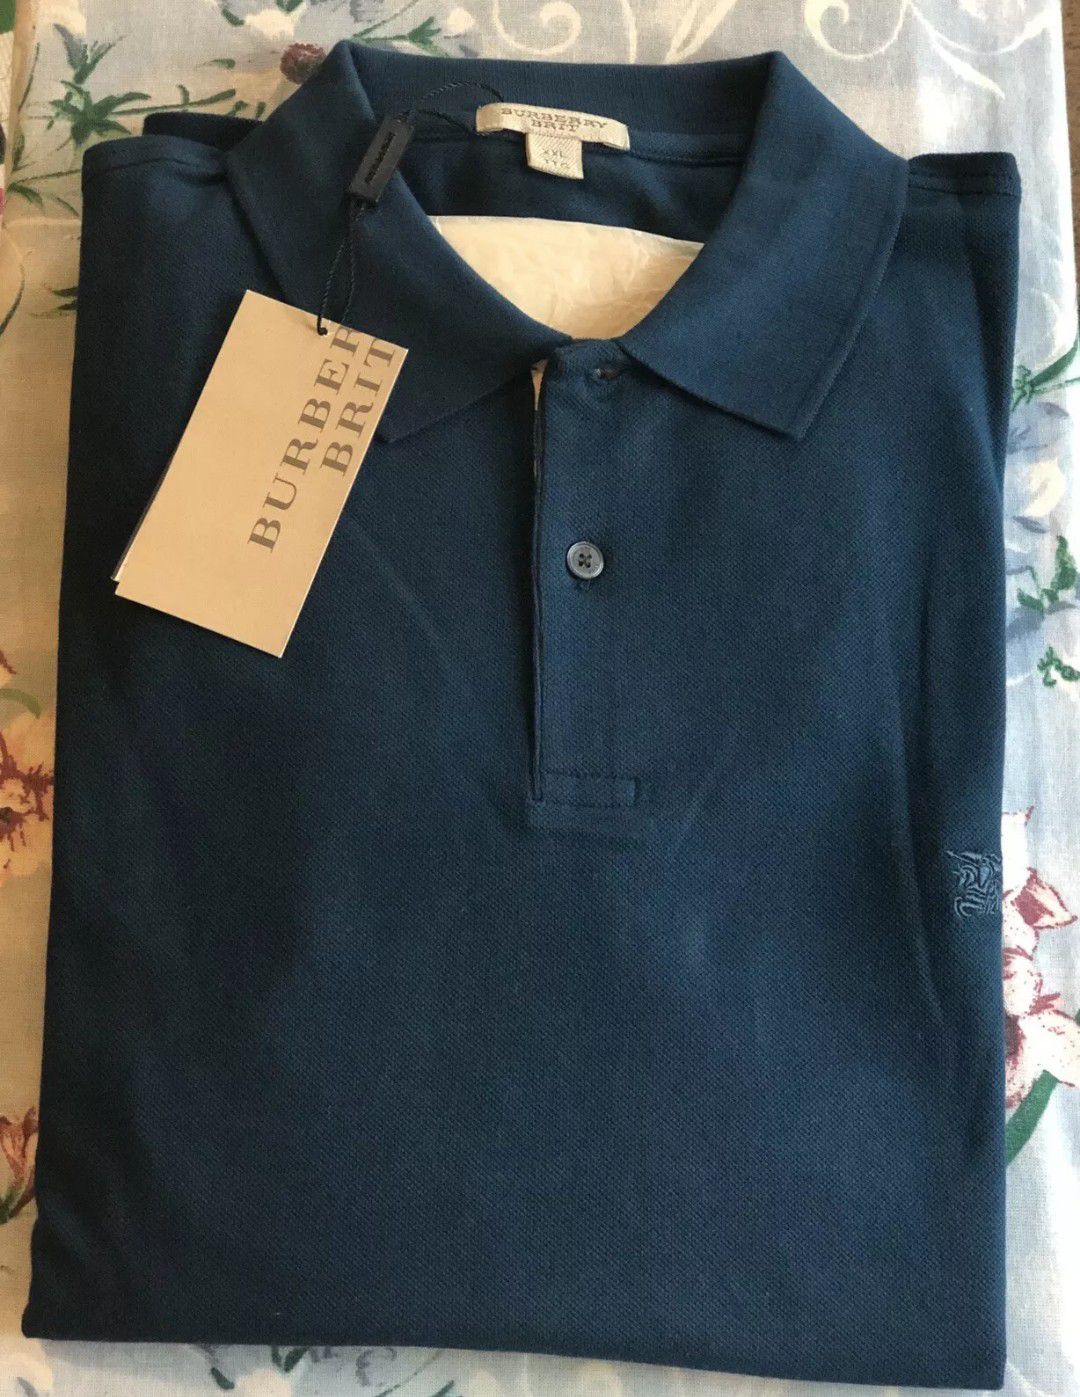 Burberry men's XL Polo Shirt. Condition is new with tags.